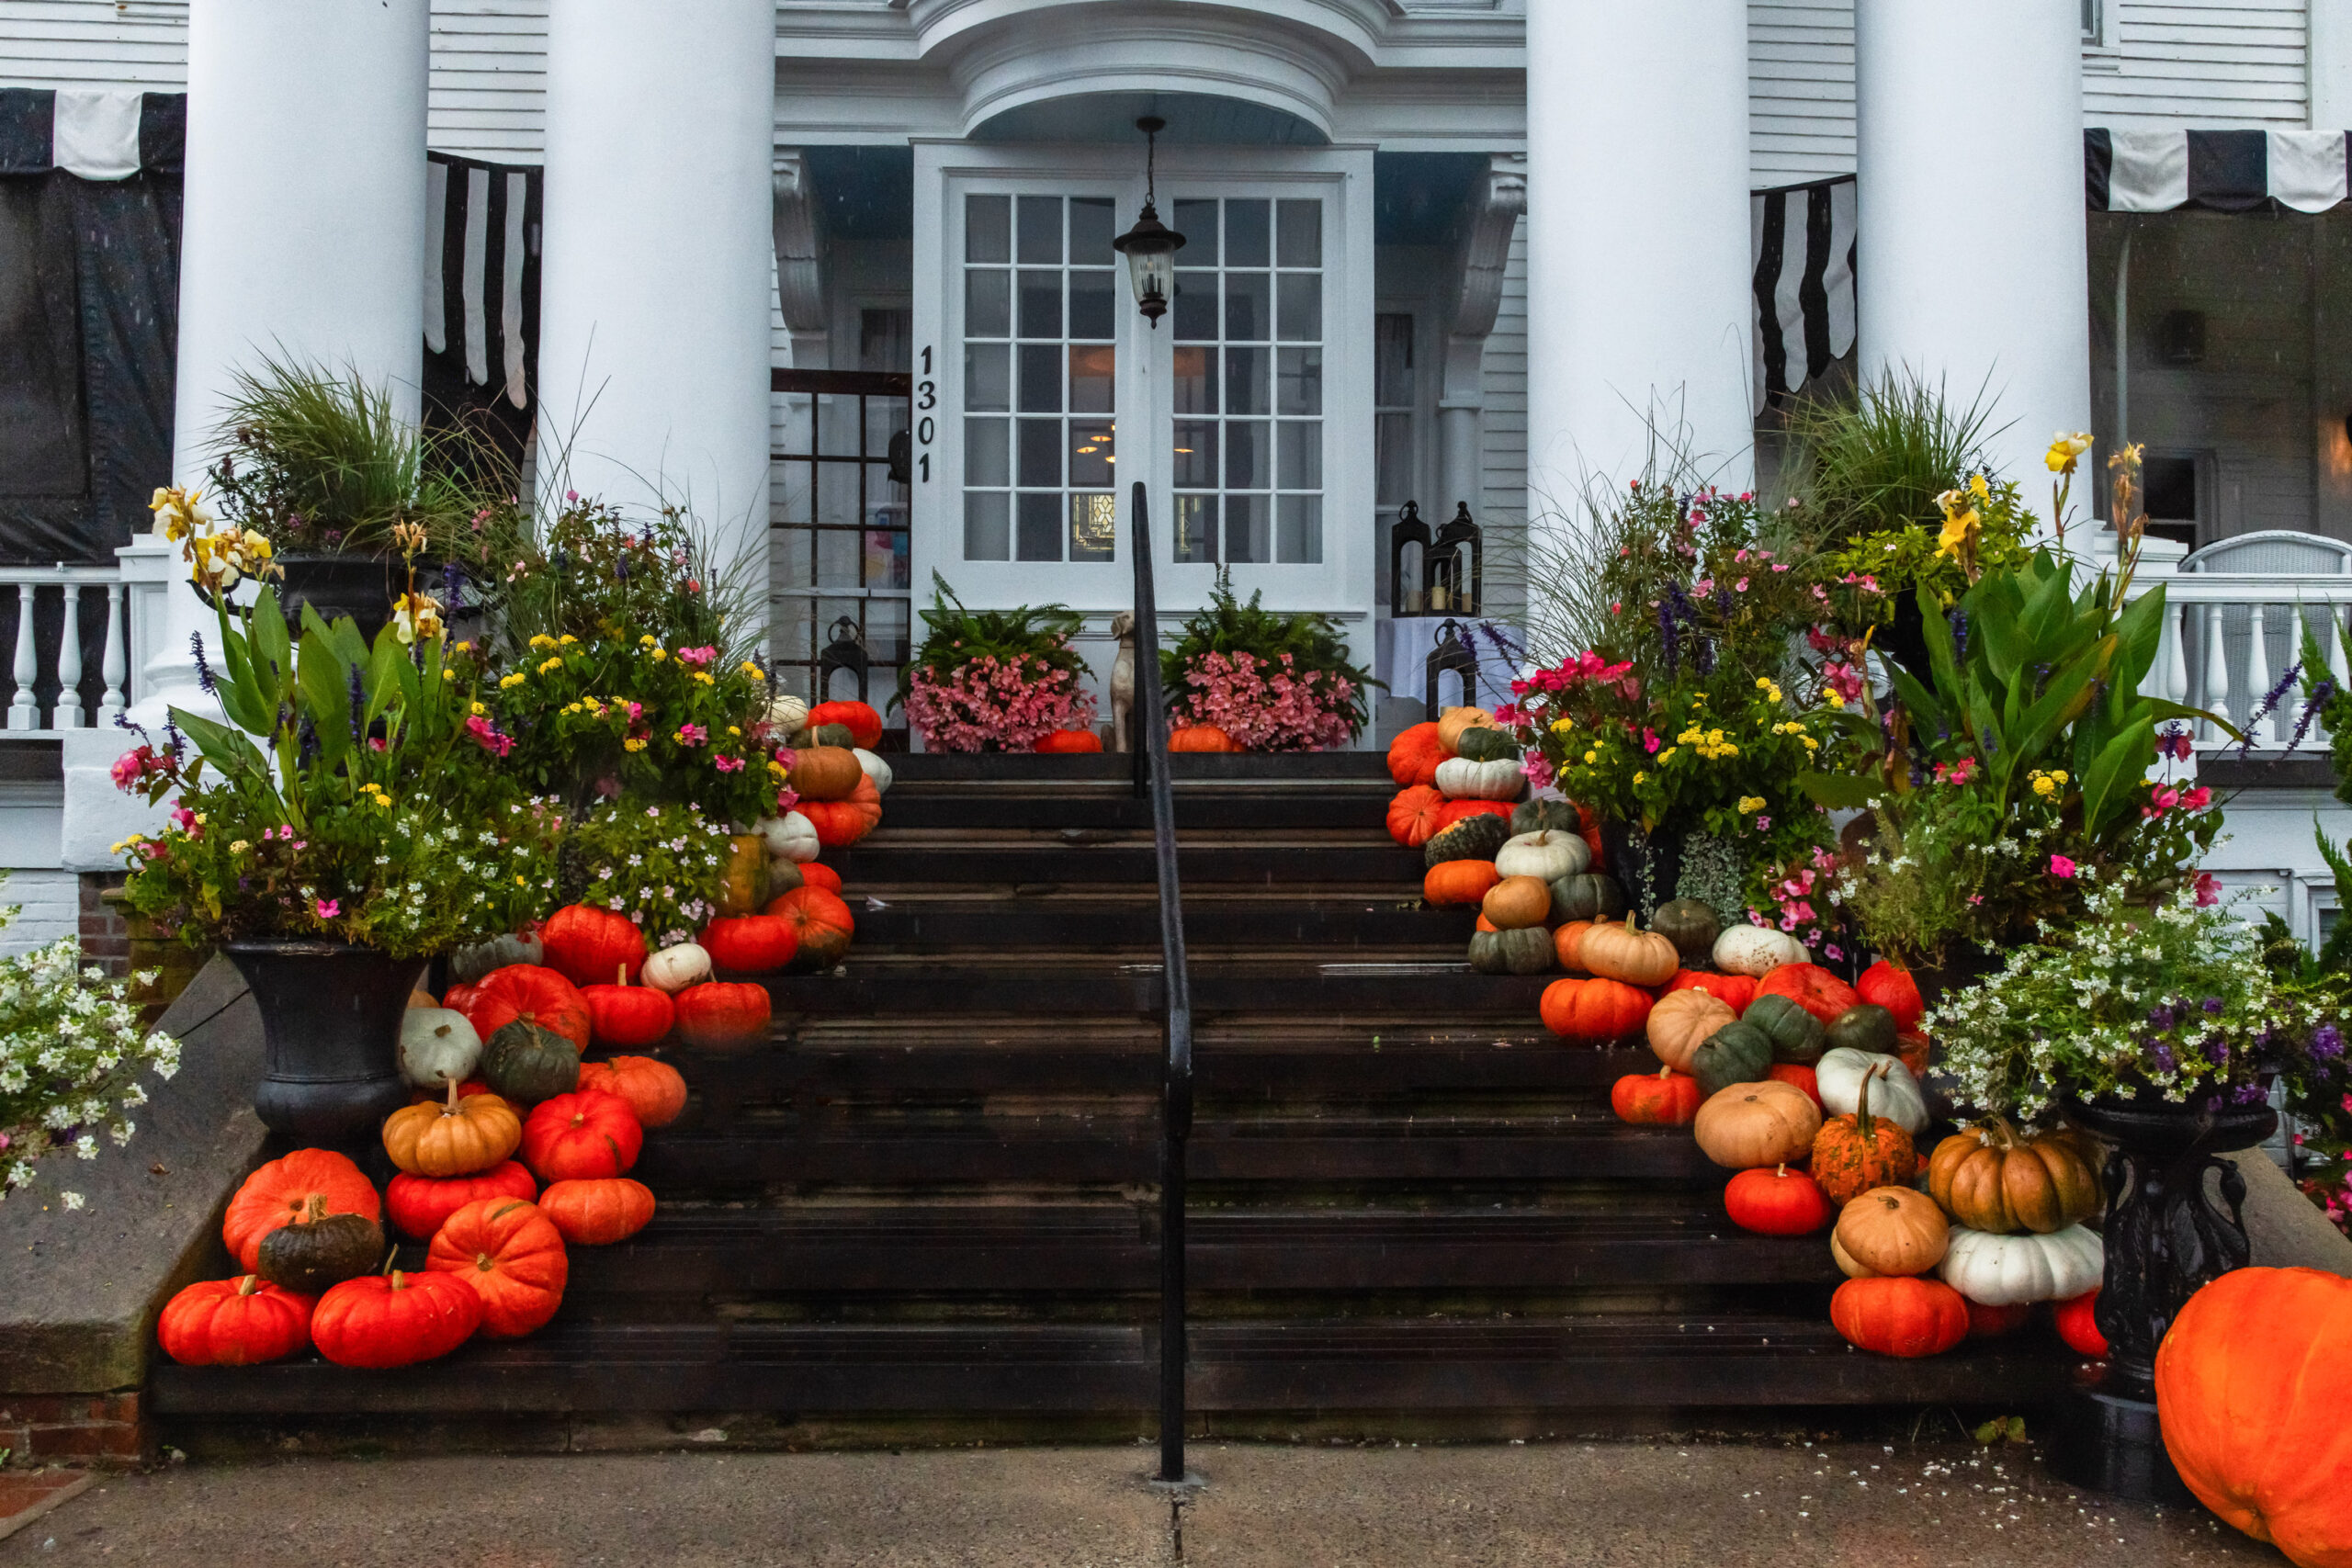 Piles of pumpkins framing the stairs leading up to the entrance of Peter Shield's Inn